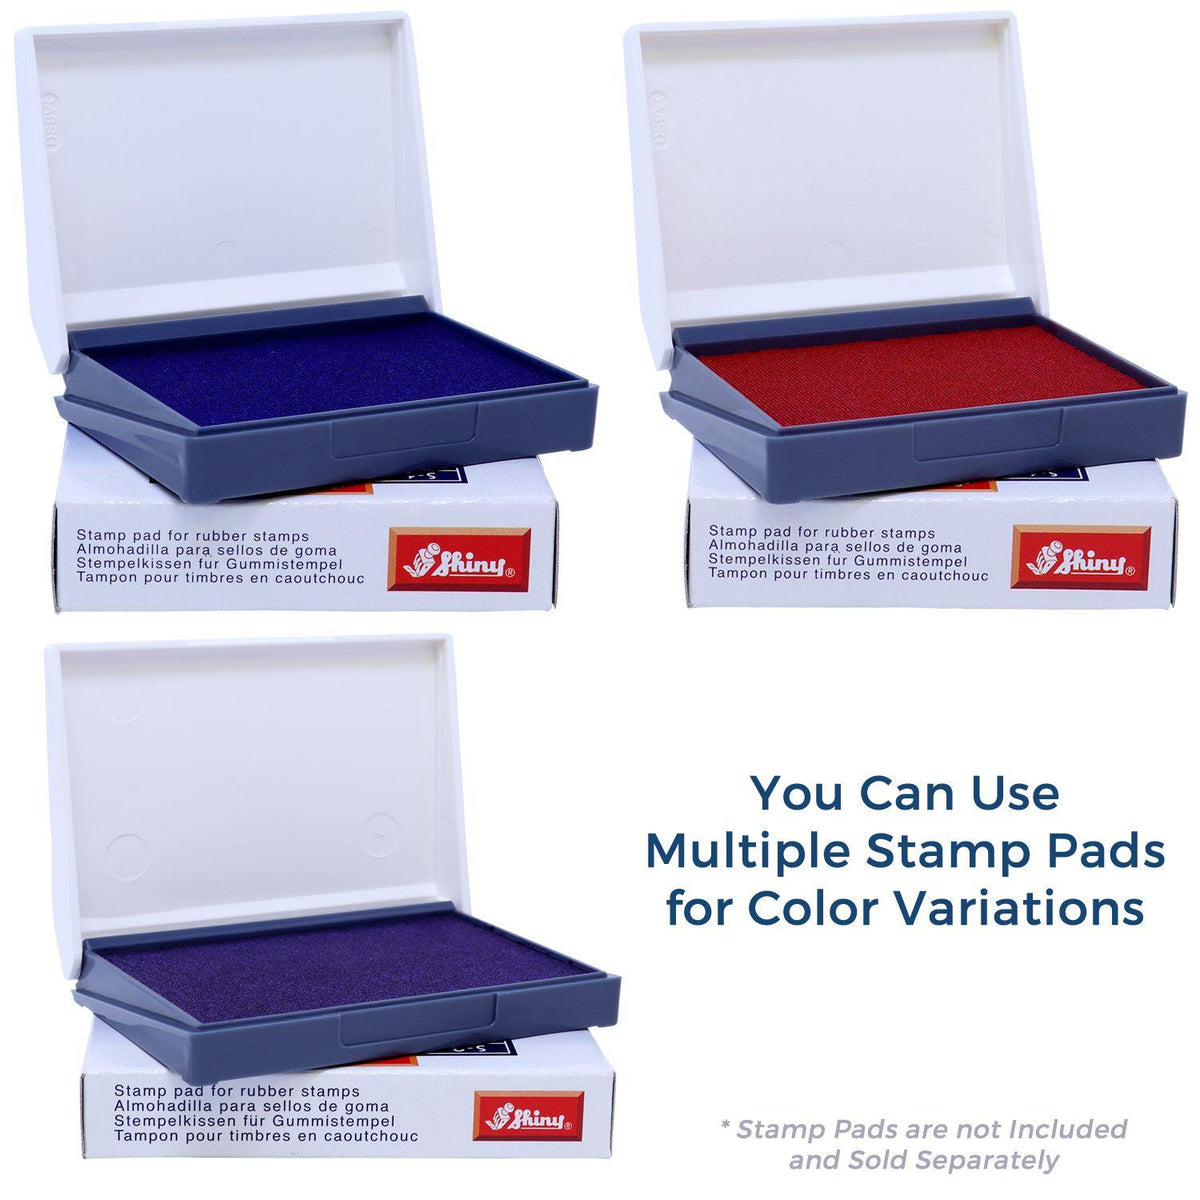 Stamp Pads for Large Optima Confidential Rubber Stamp Available